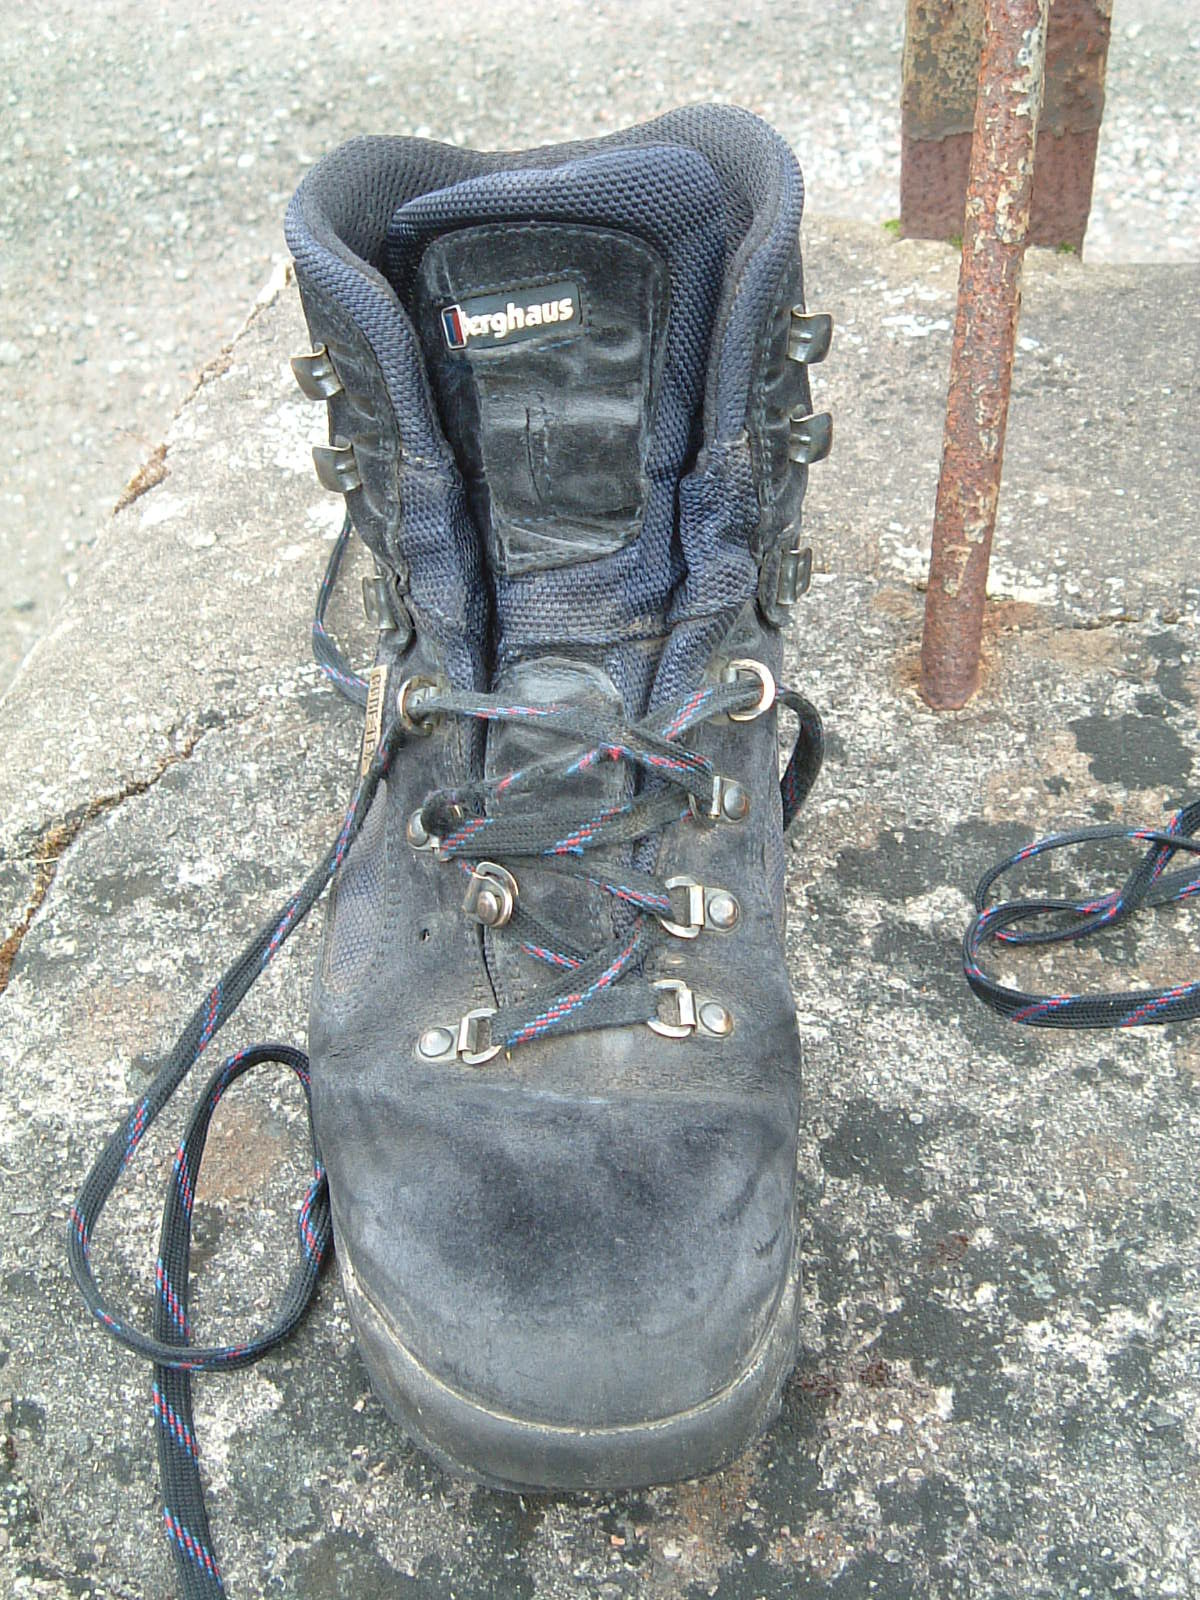 My worn-out right boot